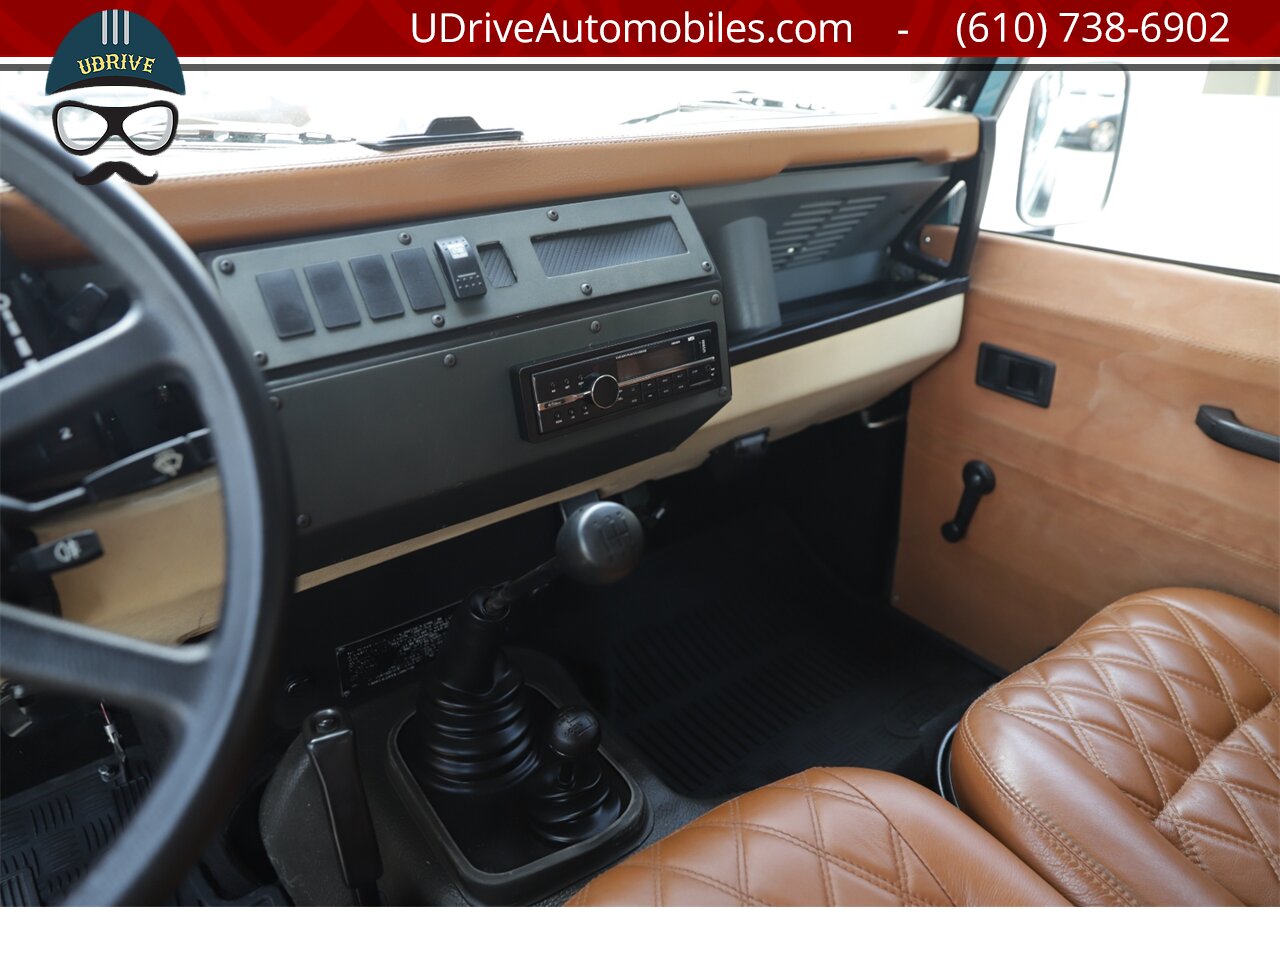 1986 Land Rover Defender 90 D90 4.0L V8 5 Speed Manual New Interior  $25k Recent Engine Build - Photo 35 - West Chester, PA 19382